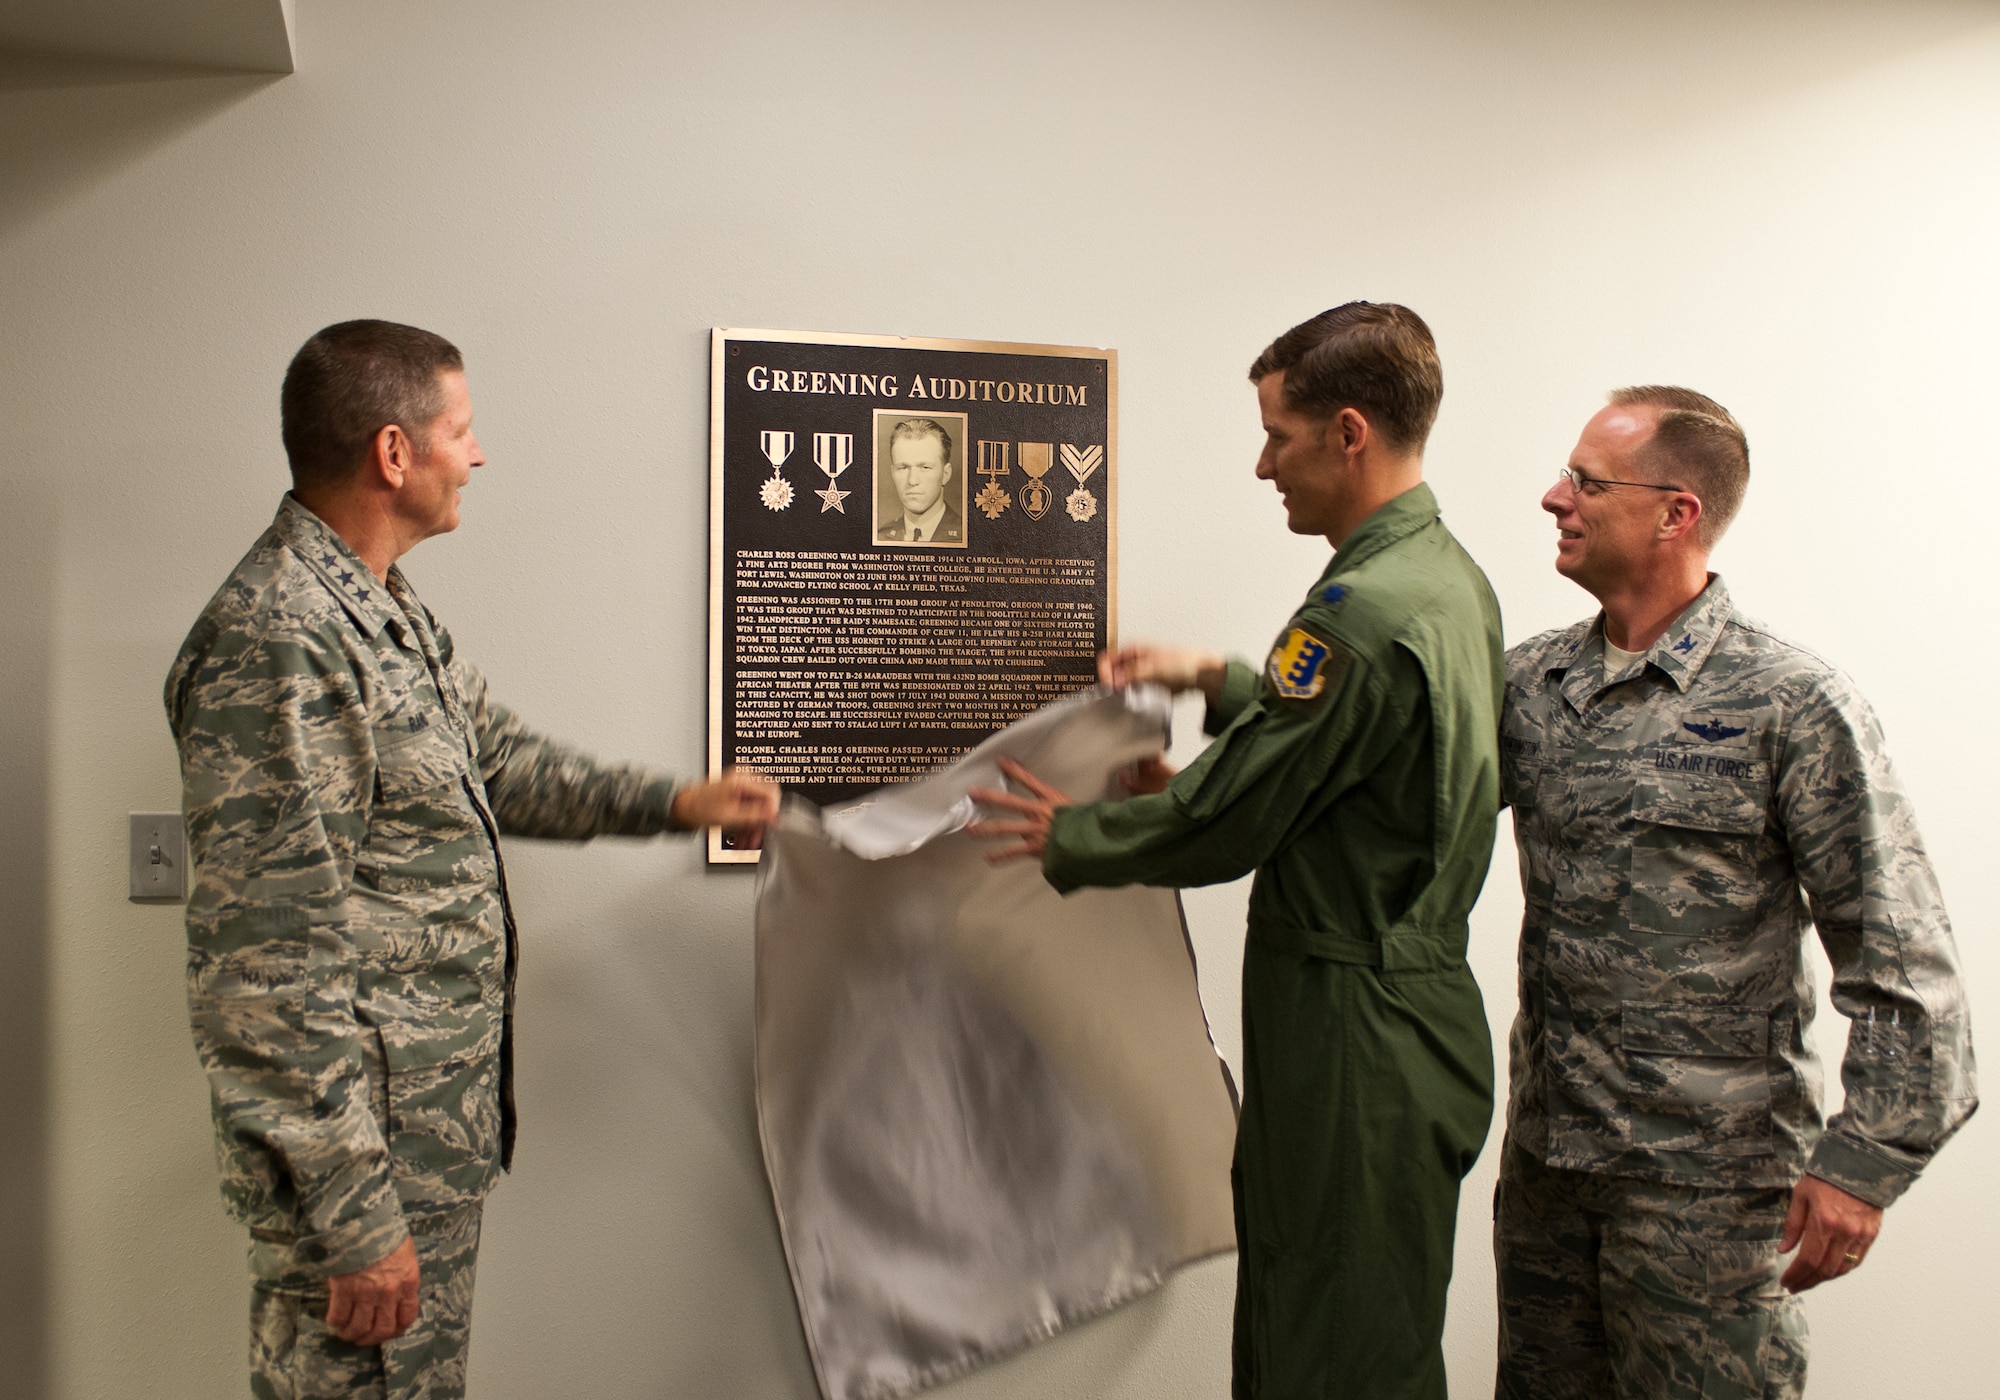 Lt. Gen. Robin Rand, 12th Air Force commander, Lt. Col. Christopher Clark, 432nd Attack Squadron commander, and Col. Mark Weatherington, 28th Bomb Wing commander, unveil a plaque dedicating the 432nd ATKS auditorium to Col. Ross Greening, a former member of the 432nd Bomb Squadron in the 1940s, at Ellsworth Air Force Base, S.D., July 12, 2012. The auditorium will be used for conducting aircrew briefings prior to combat support sorties, mass briefings for intelligence updates and aircrew/squadron personnel training vital to Ellsworth’s MQ-9 operations. (U.S. Air Force photo by Airman 1st Class Alystria Maurer)